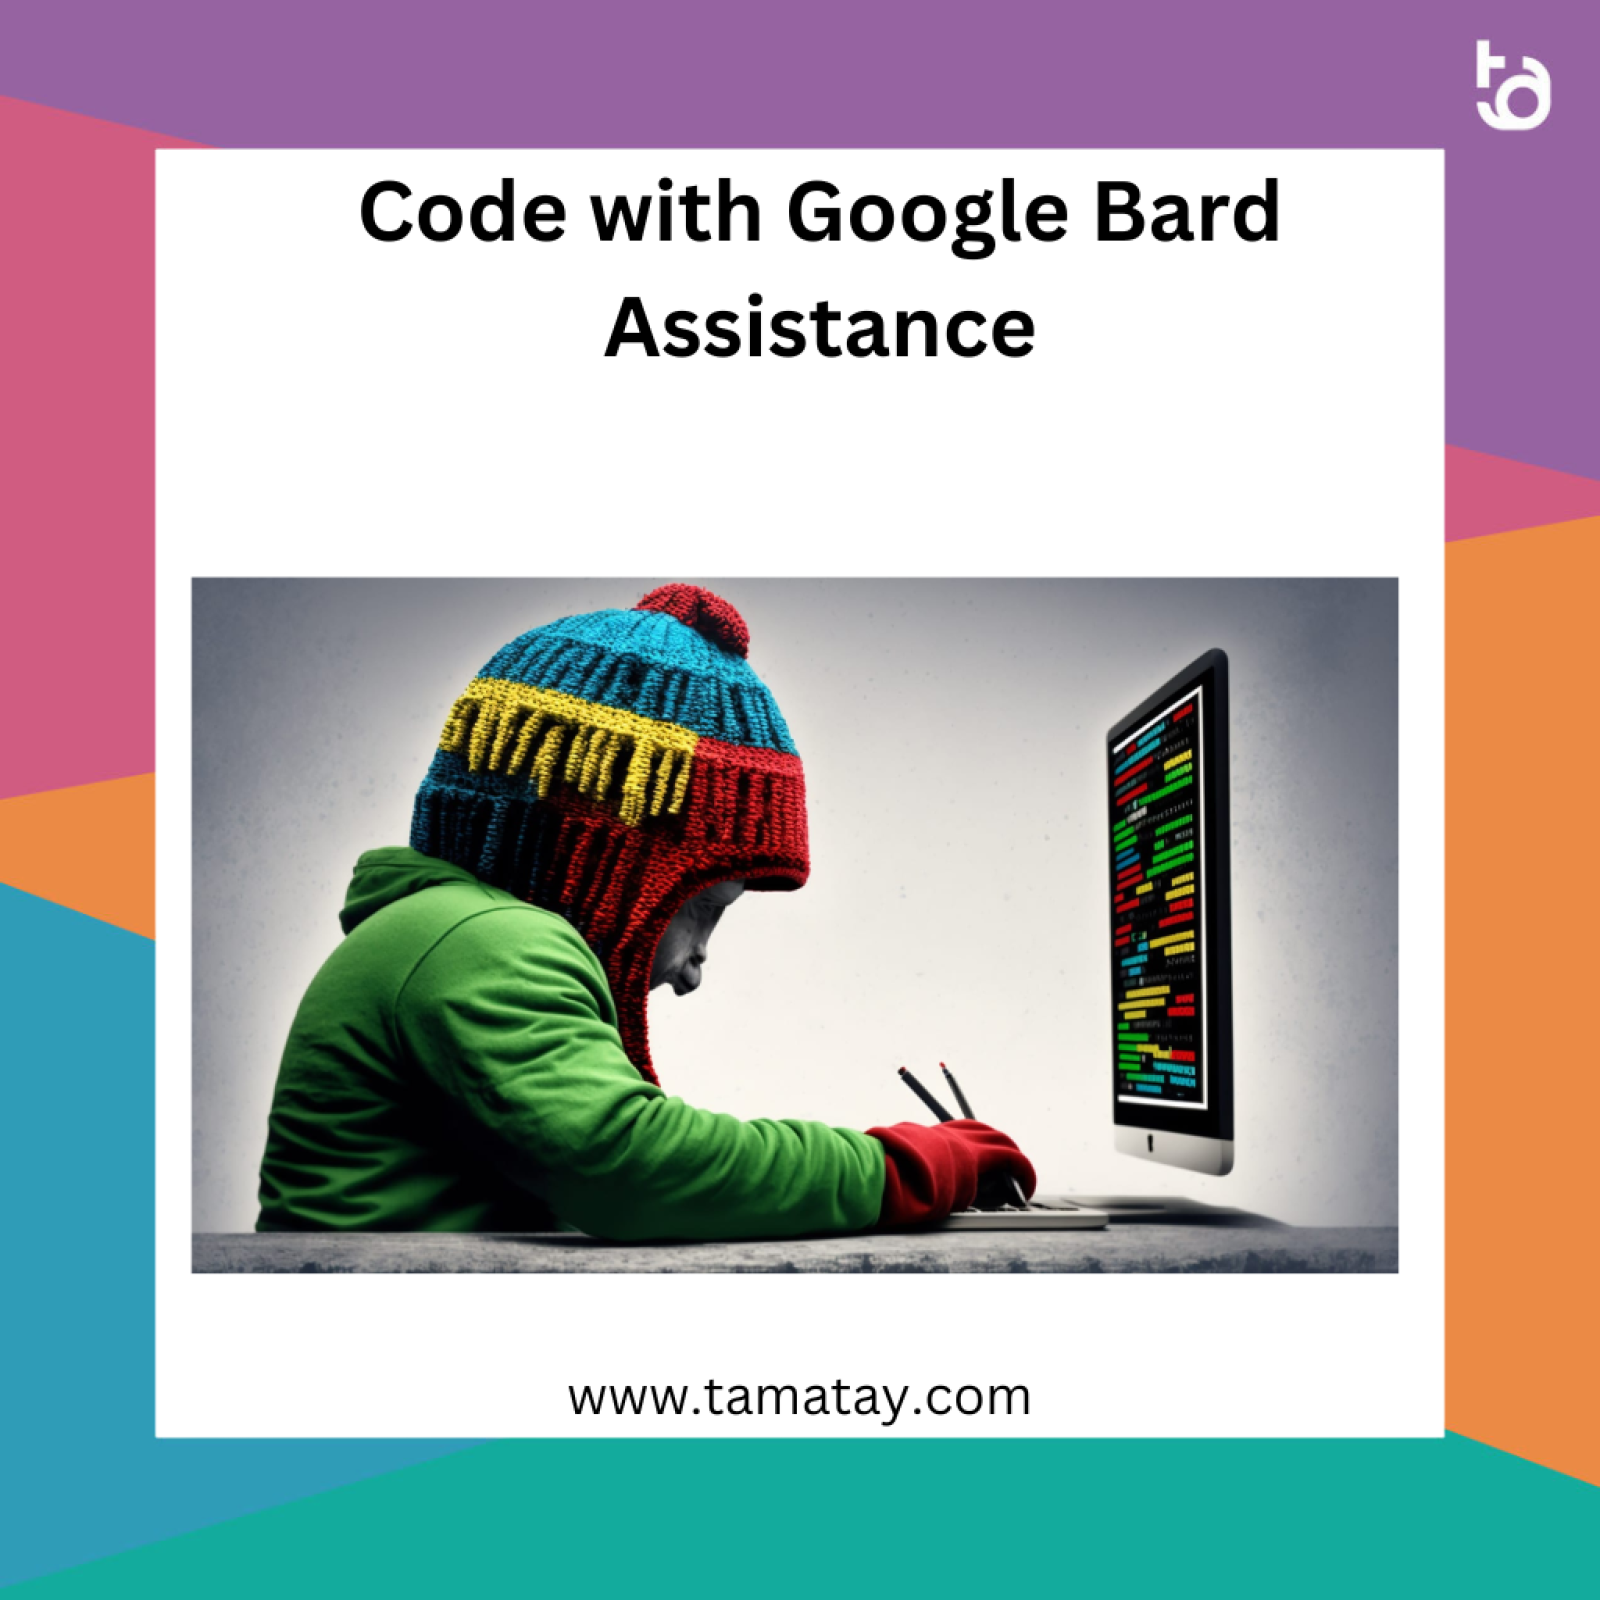 Code with Google Bard Assistance